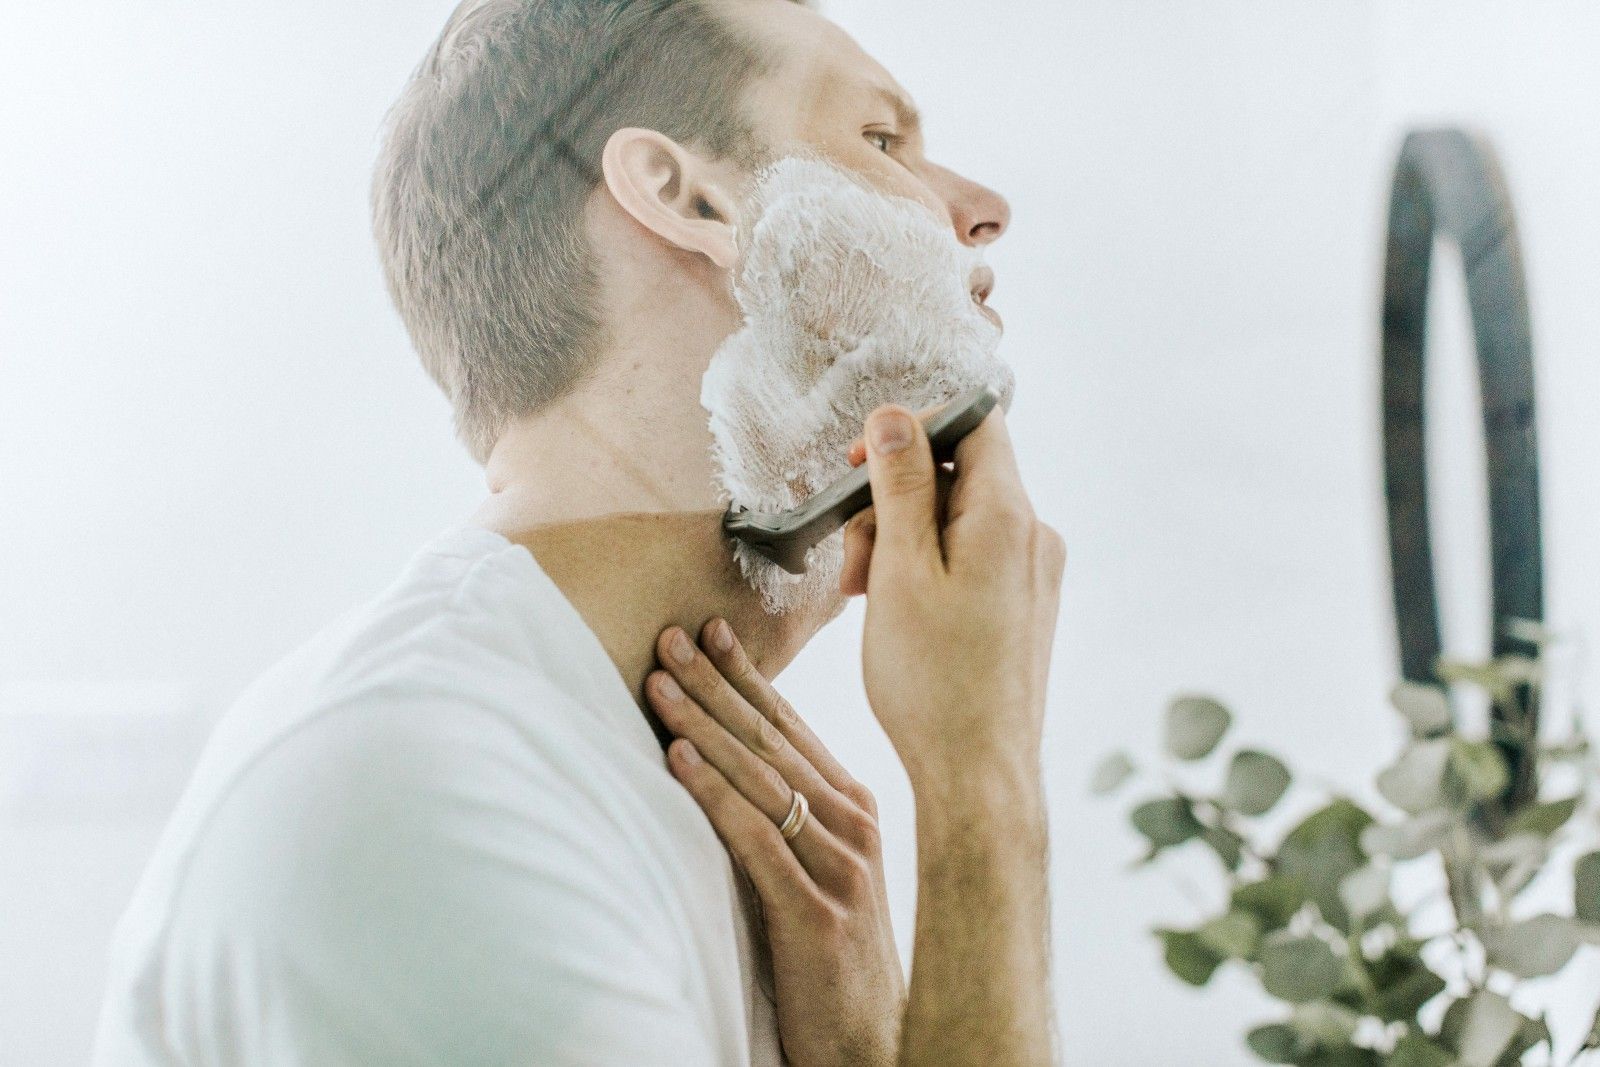 Men’s Style Tip: Men’s guide to grooming and skincare